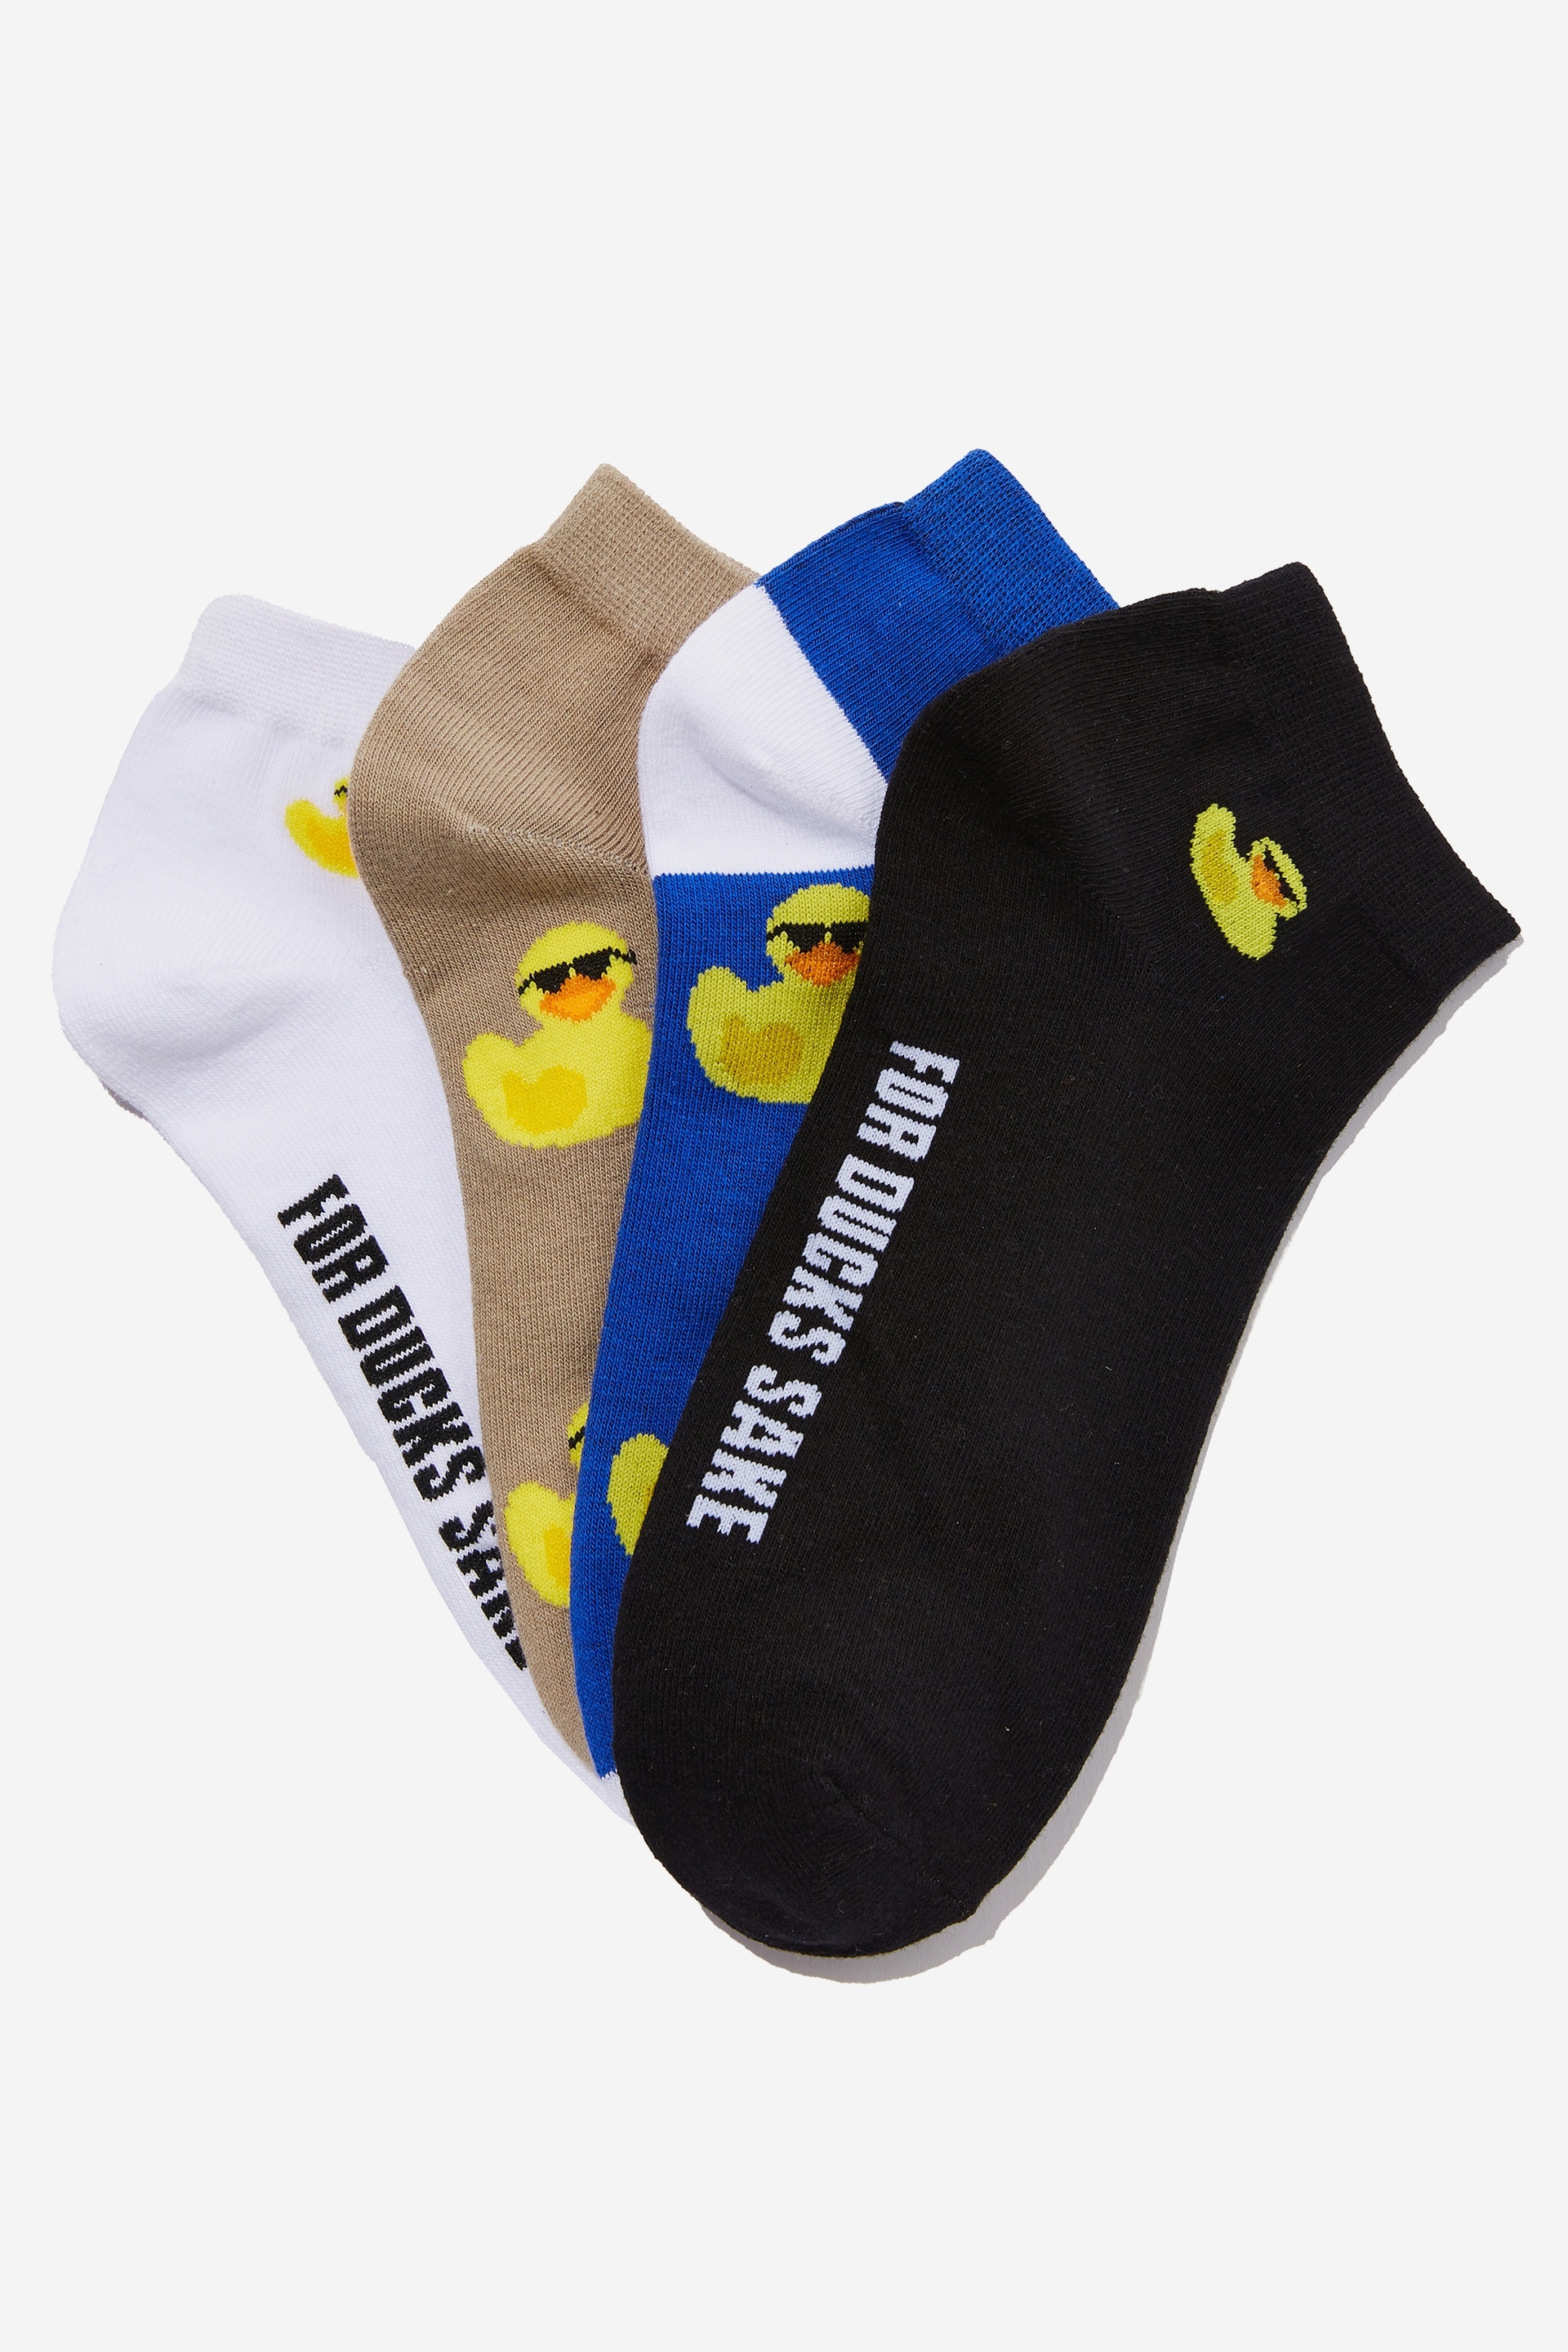 Typo - 4 Pack Of Ankle Socks - Cool duck (m/l)